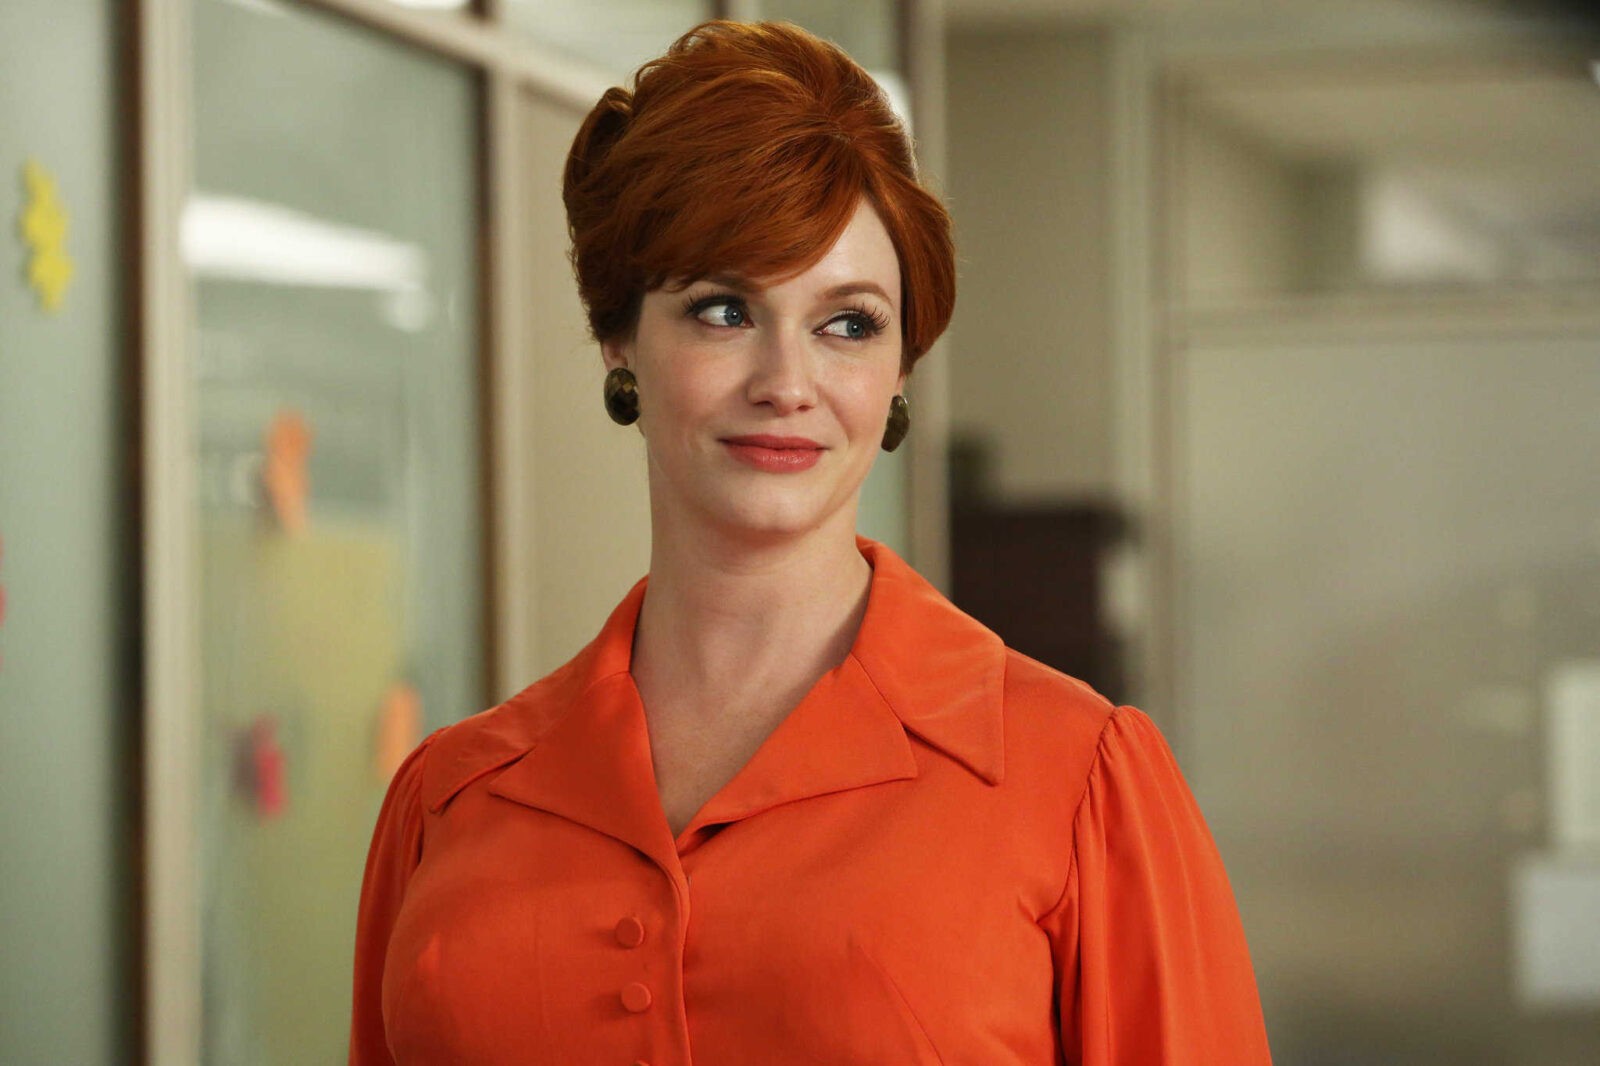 Bowling Ryd op kompakt Interview with Celebrity Hairstylist Behind Christina Hendricks' Mad Men  Looks — How to be a Redhead - Redhead Makeup